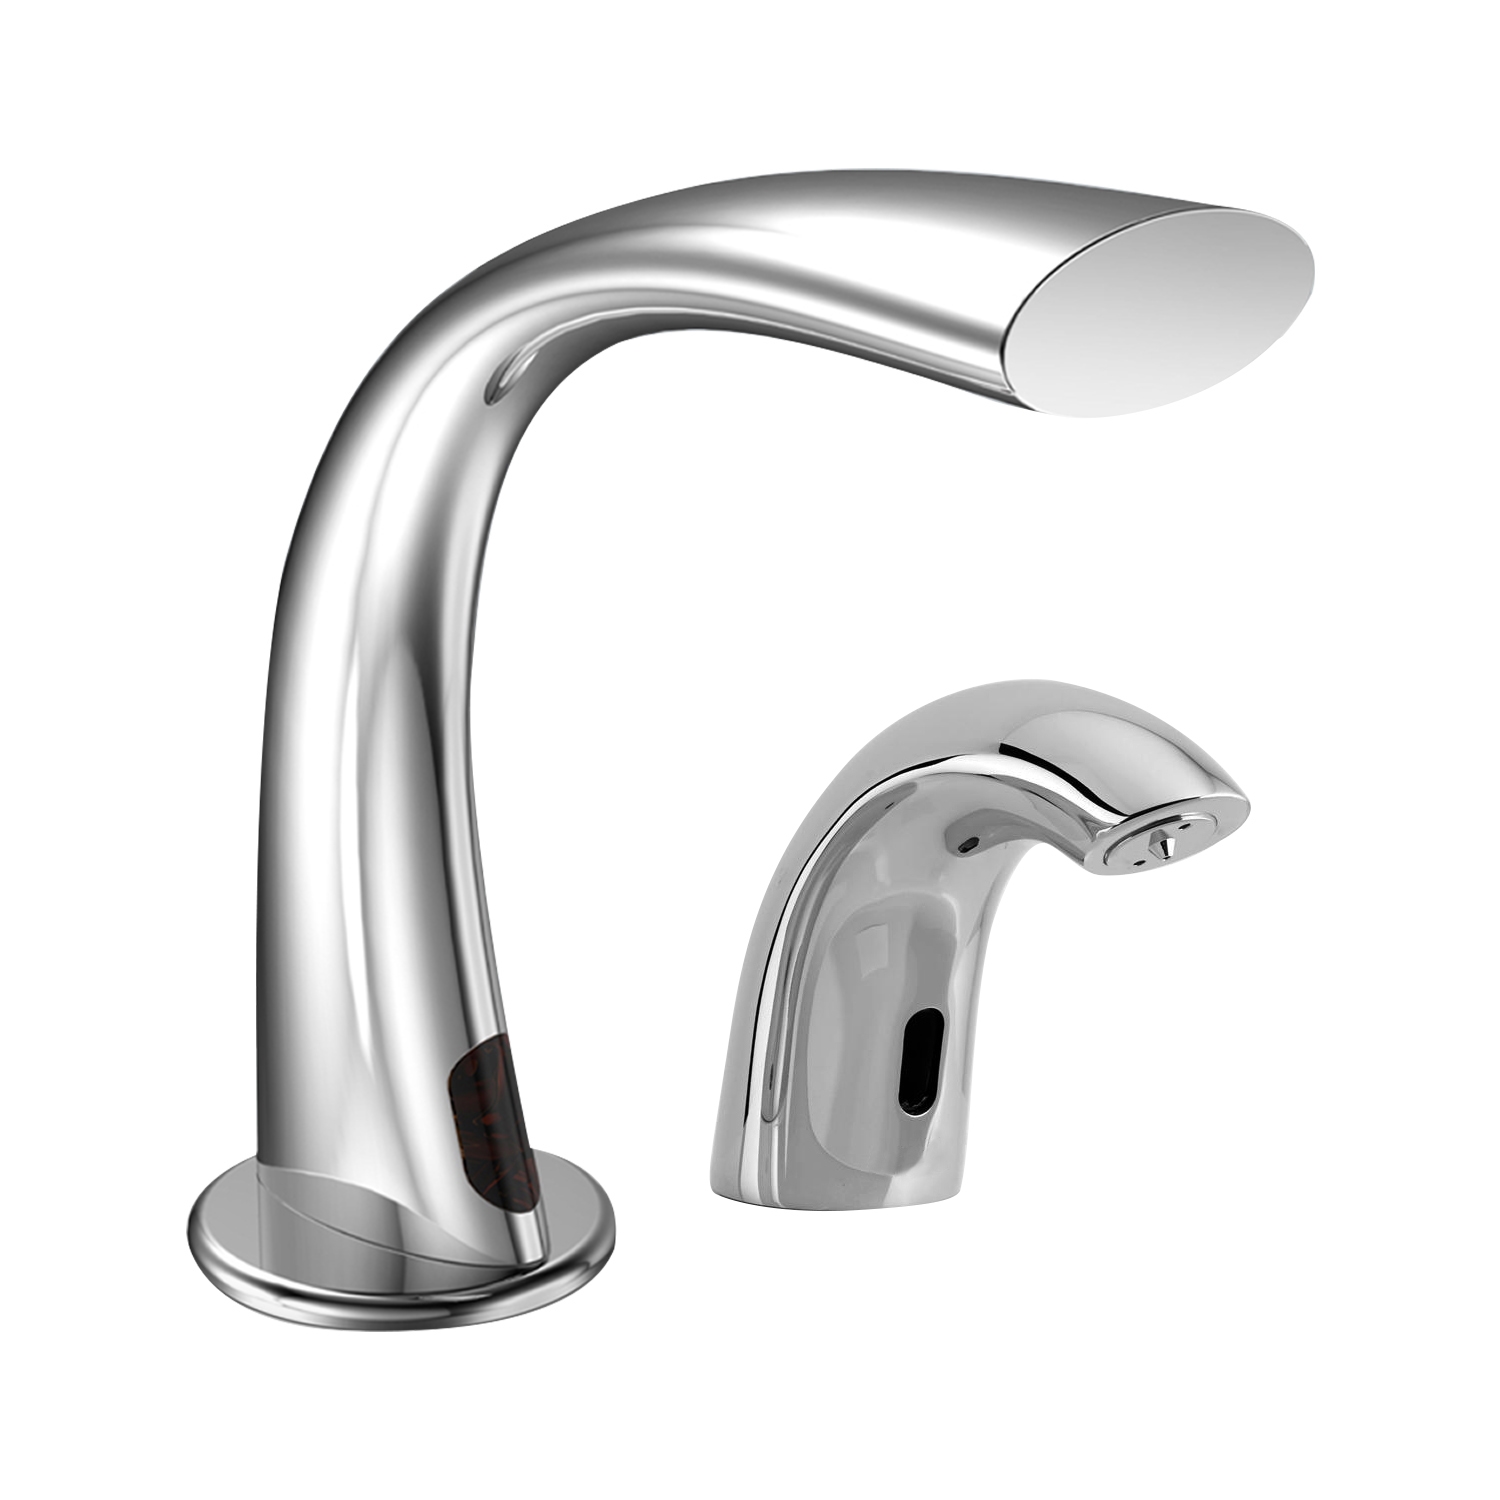 Fontana Marseille Freestanding Automatic Commercial Sensor Faucet & Automatic Soap Dispenser in Polished Chrome Finish